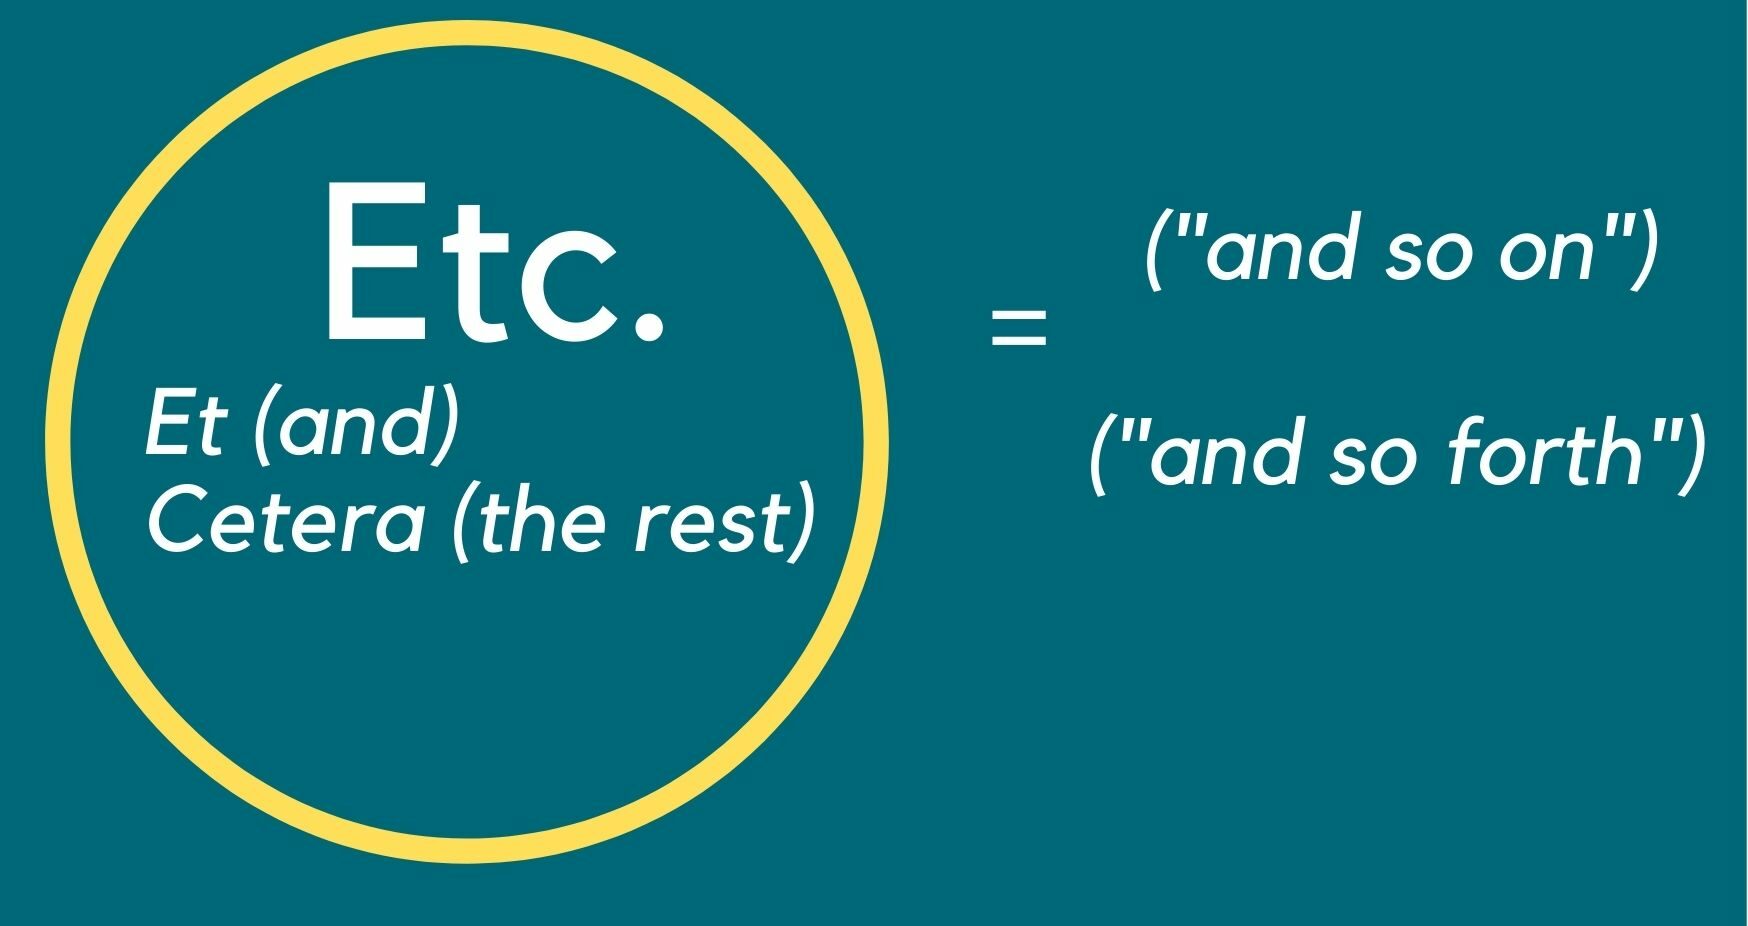 Explaining Etc. (et (and) cetera (the rest) to mean "and so on" and "and so forth"